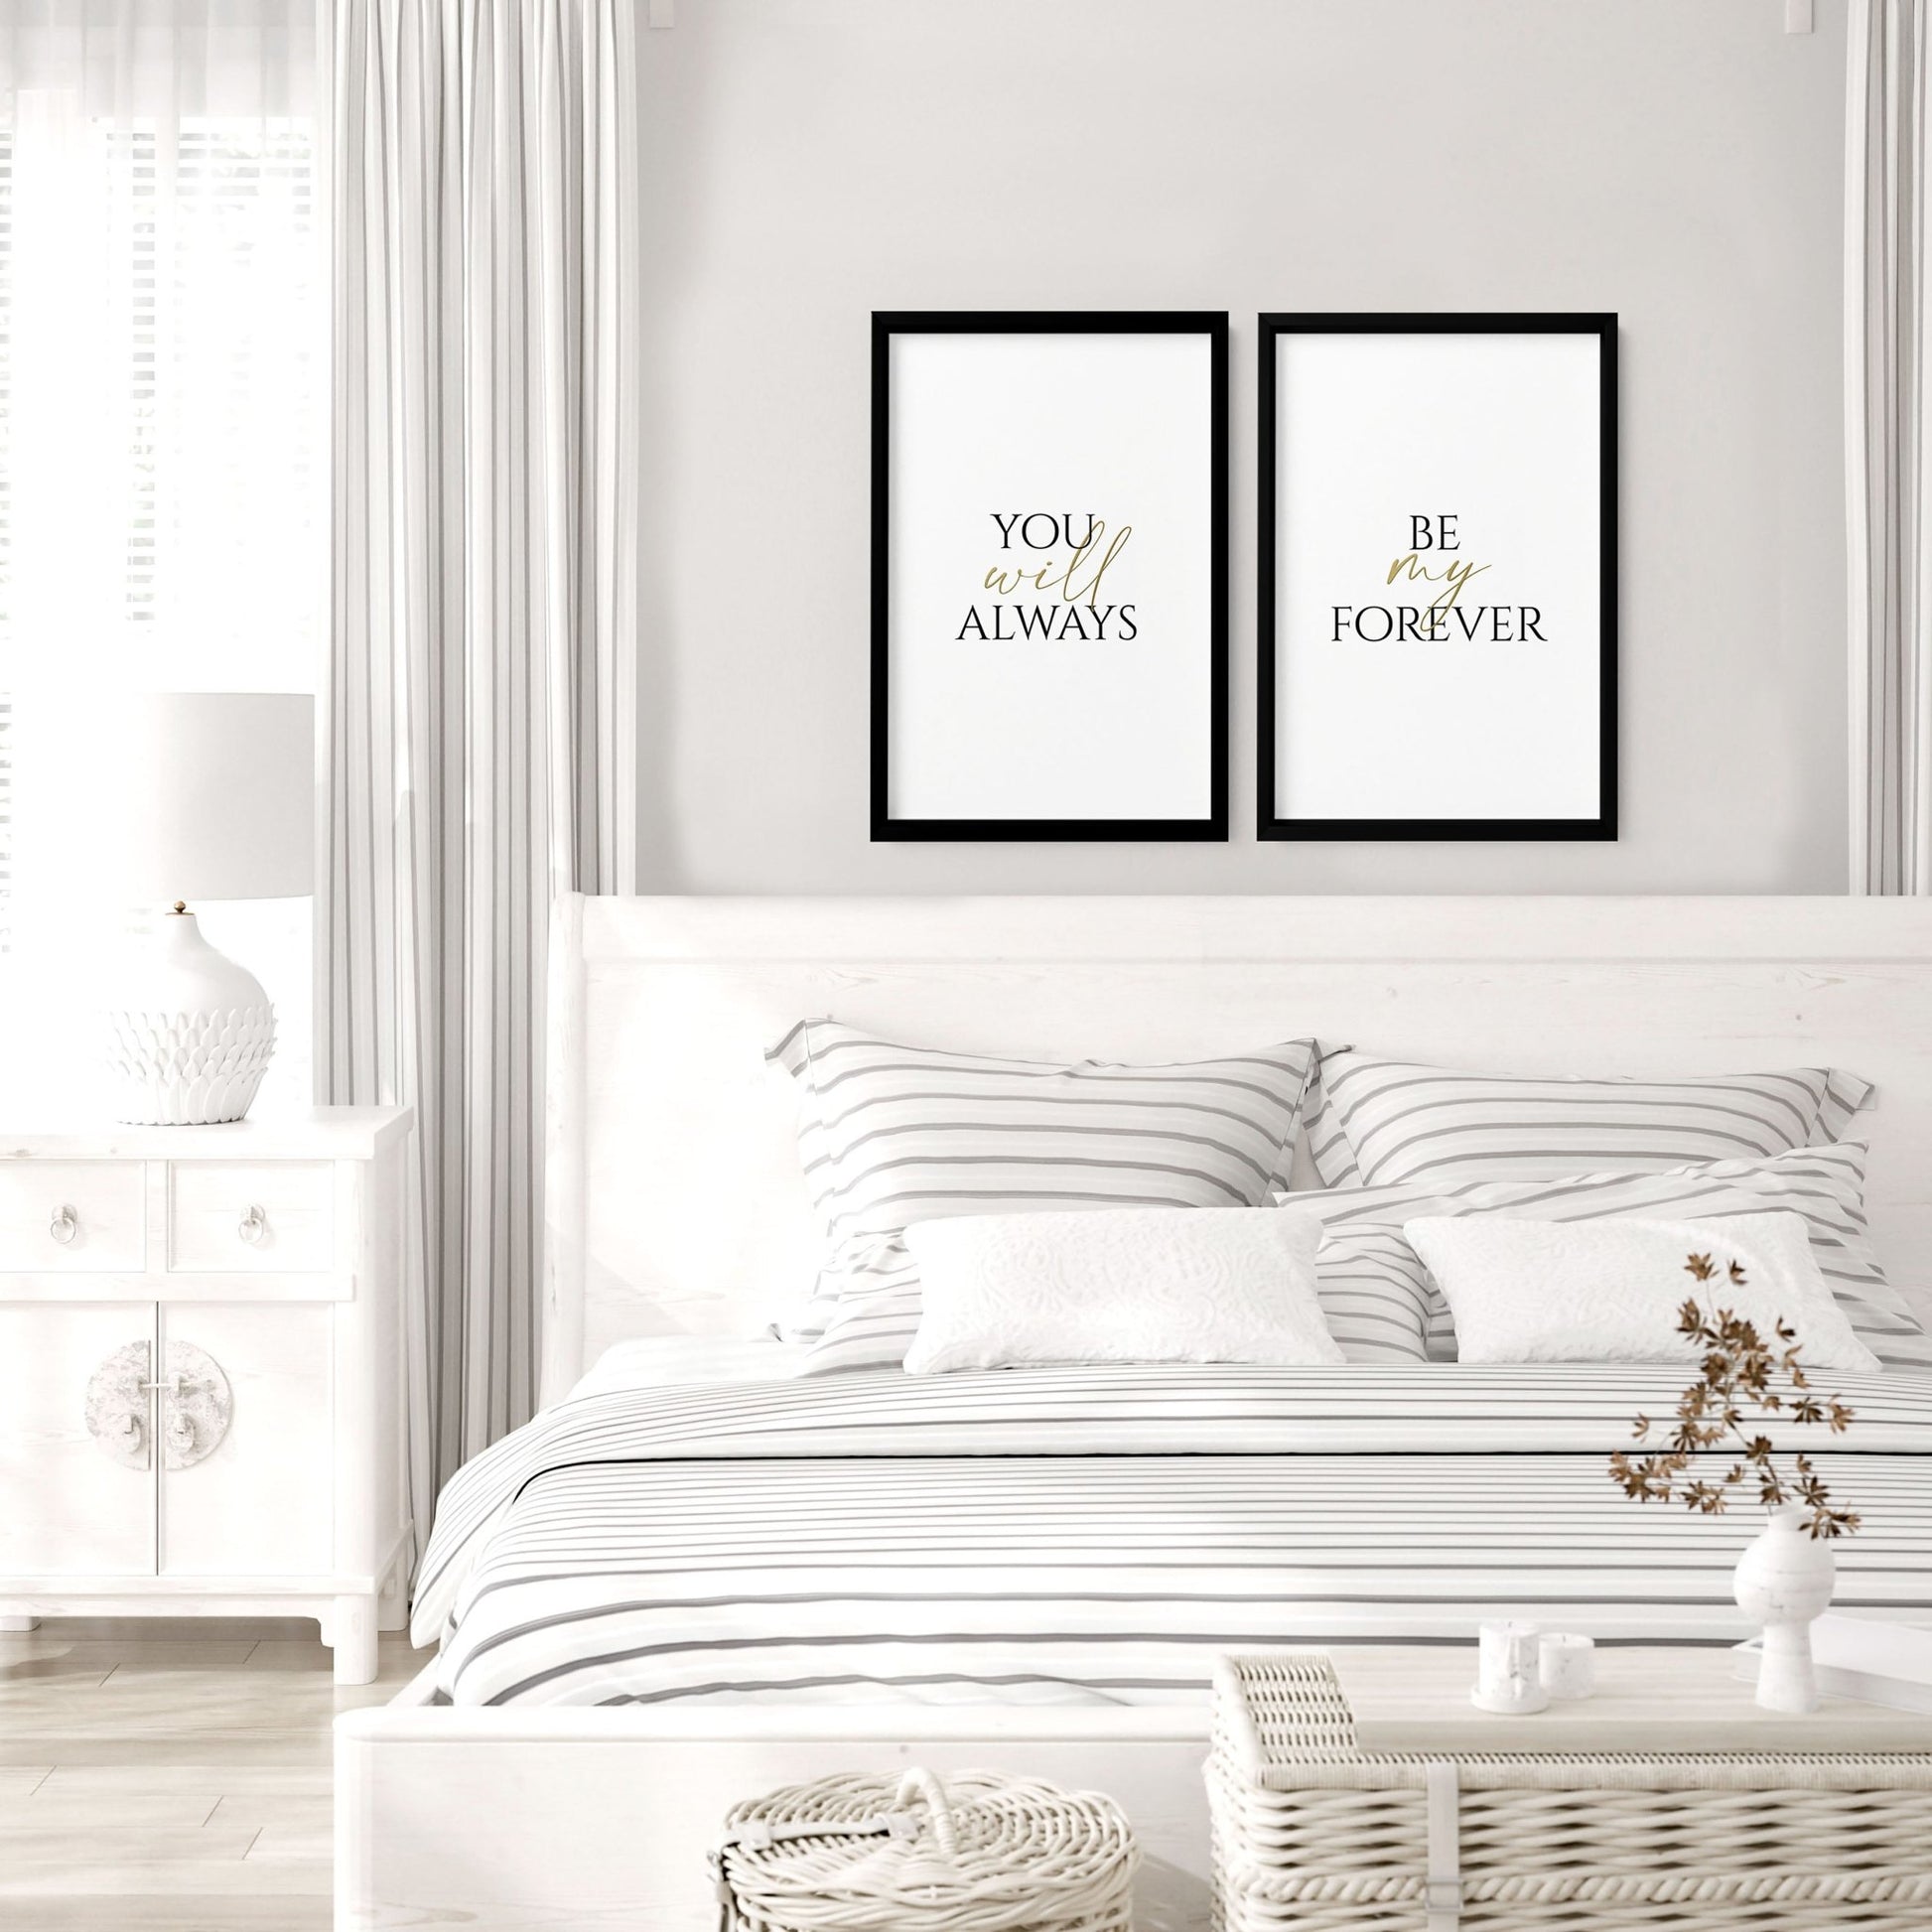 Gift idea for couples anniversary | set of 2 wall art prints for Bedroom - About Wall Art